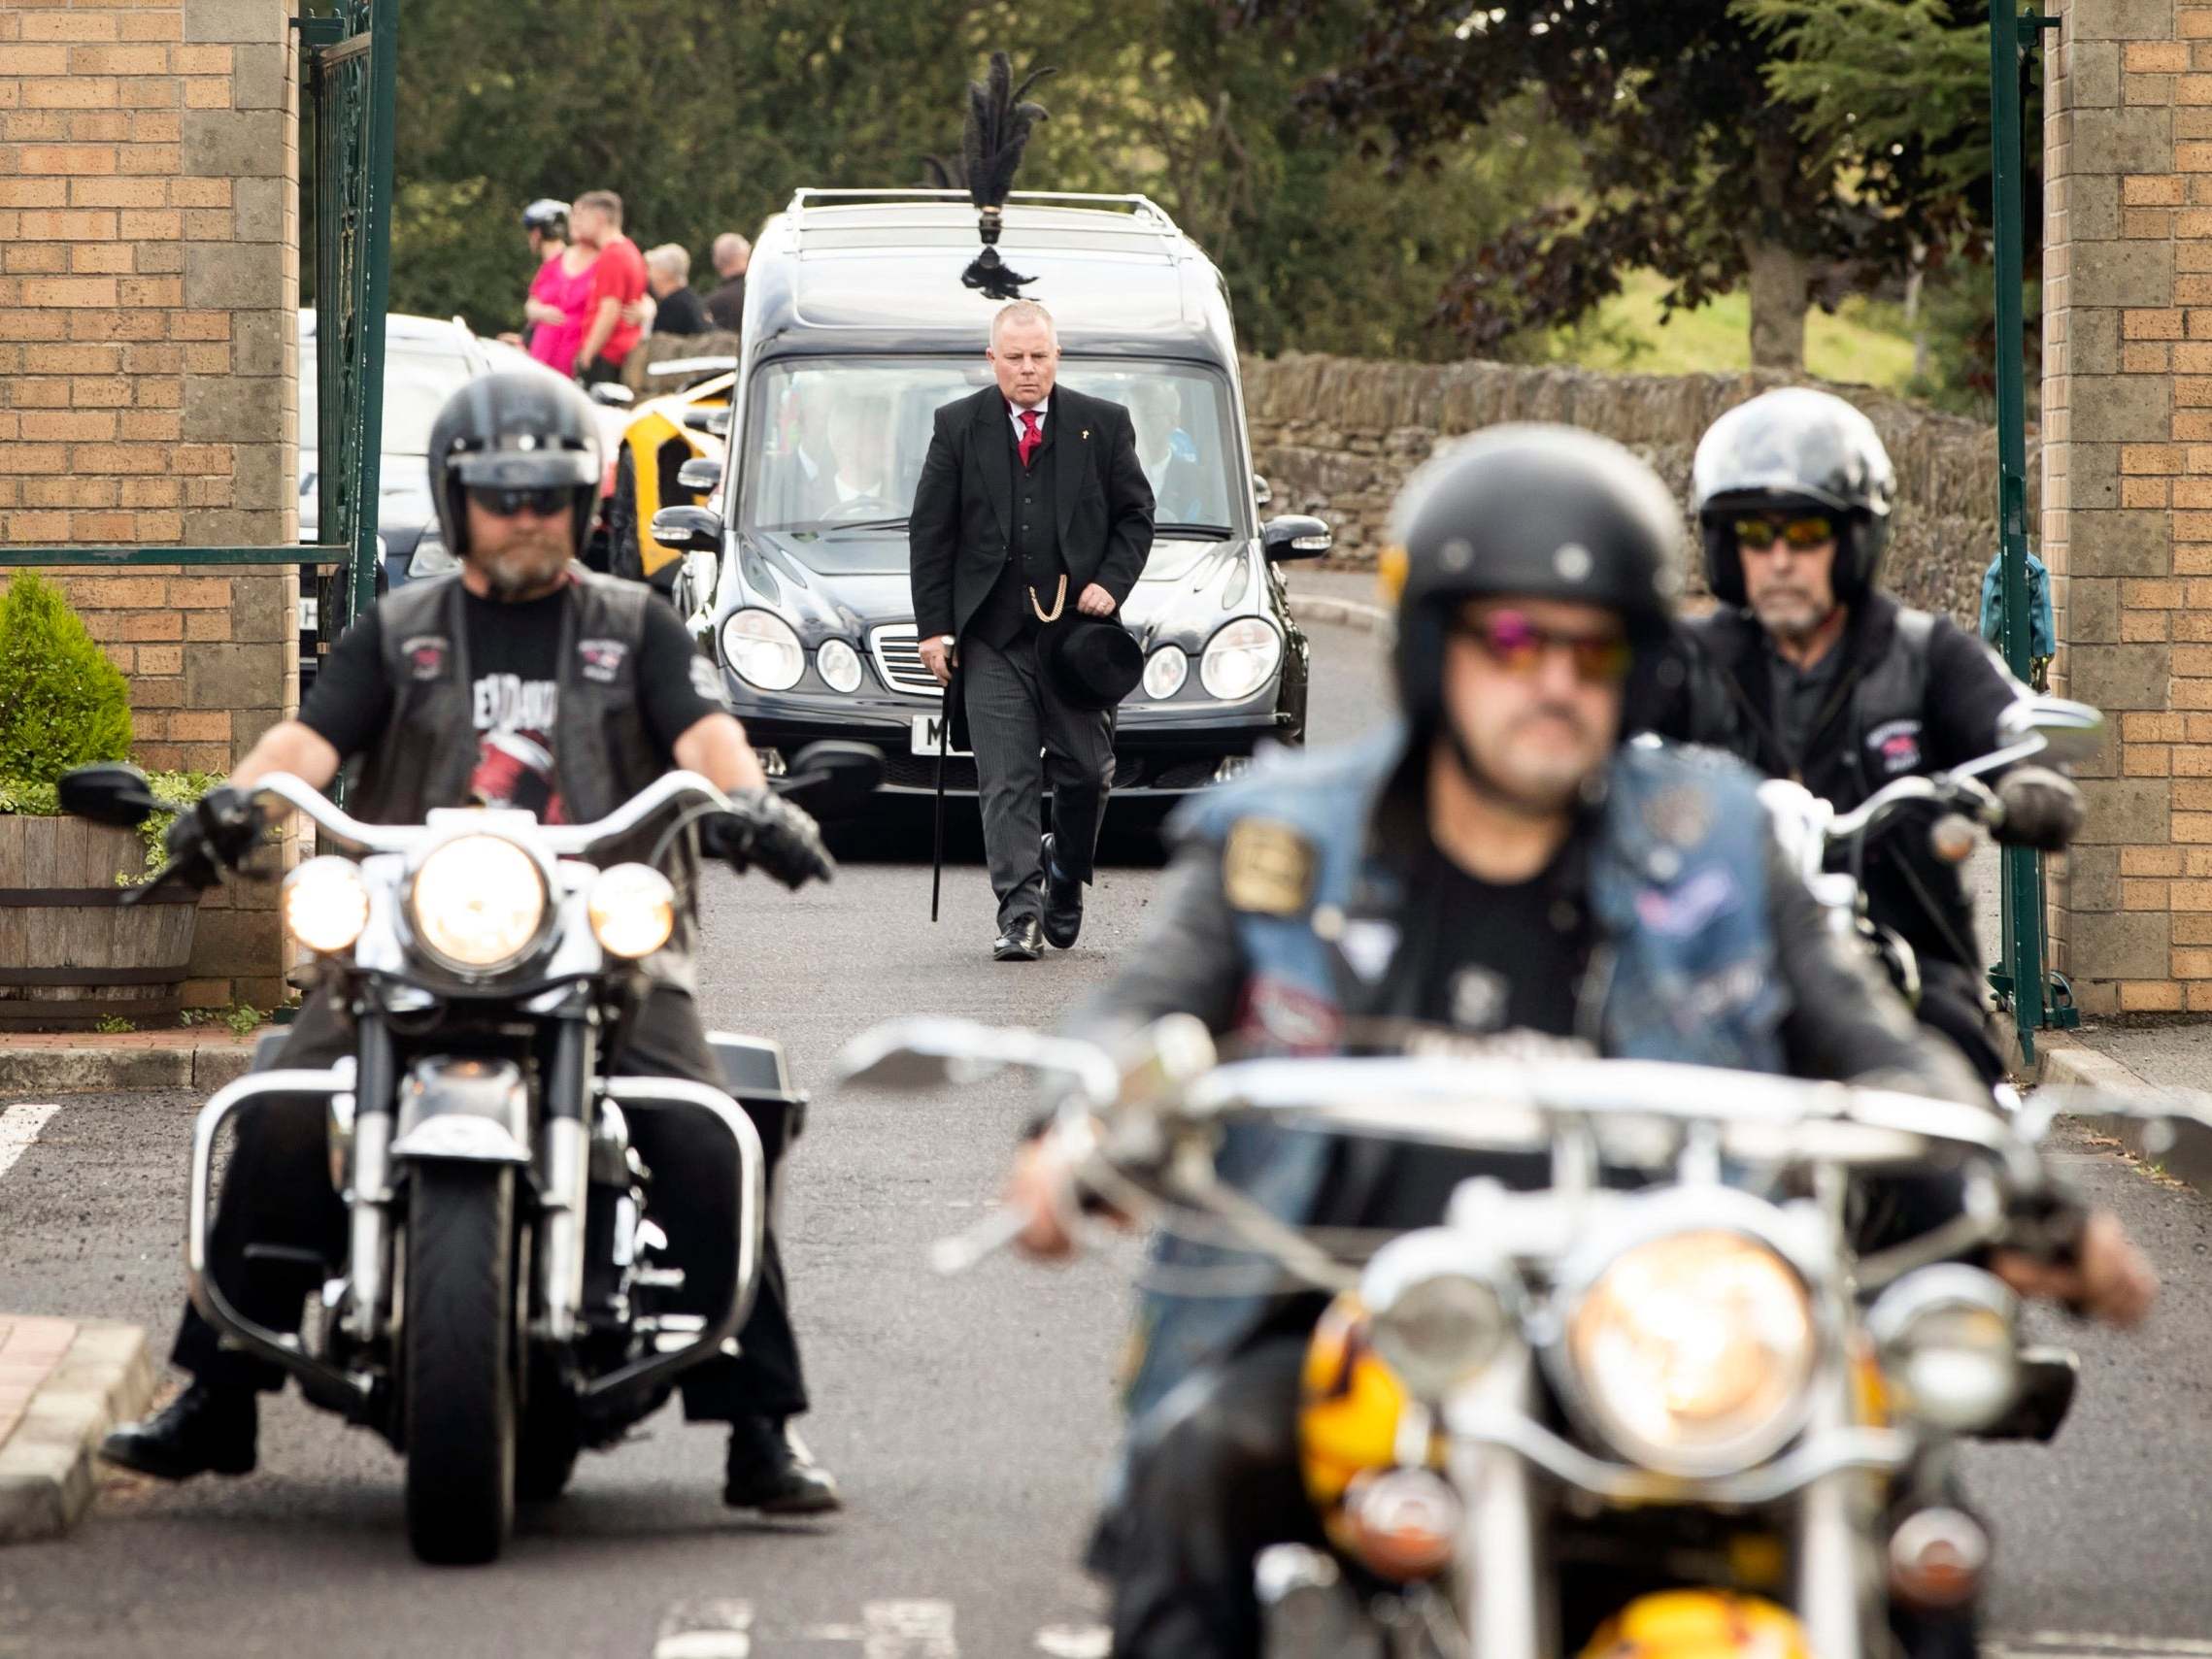 Motorbikes escort the funeral cortege arriving at Grenoside Crematorium, Sheffield, prior to the funeral of Tristan and Blake Barrass, 8 August, 2019.